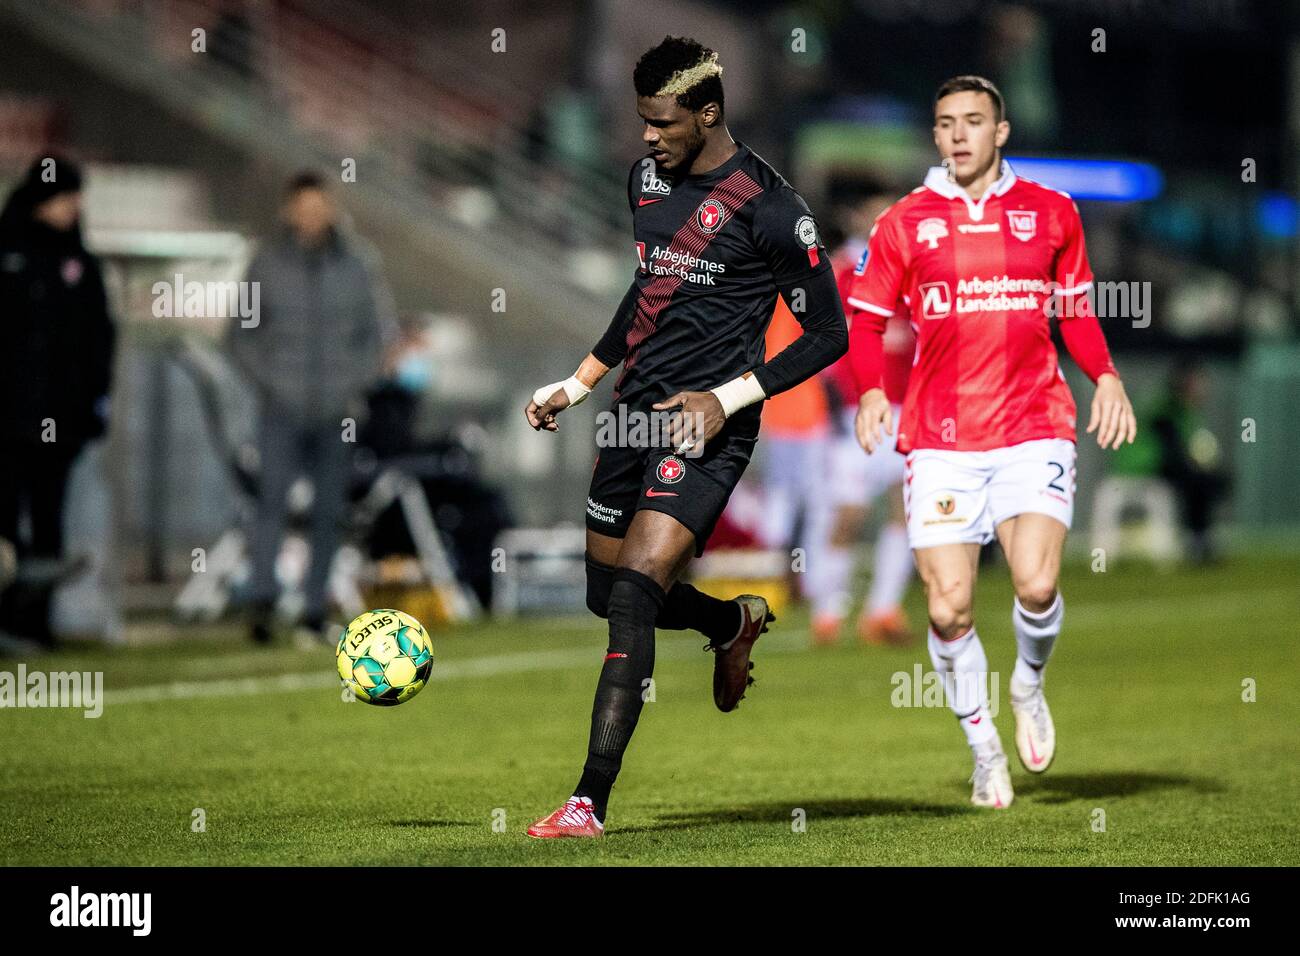 Vejle, Denmark. 05th Dec, 2020. Sory Kaba (9) of FC Midtjylland seen during  the 3F Superliga match between Vejle Boldklub and FC Midtjylland at Vejle  Stadion in Vejle. (Photo Credit: Gonzales Photo/Alamy